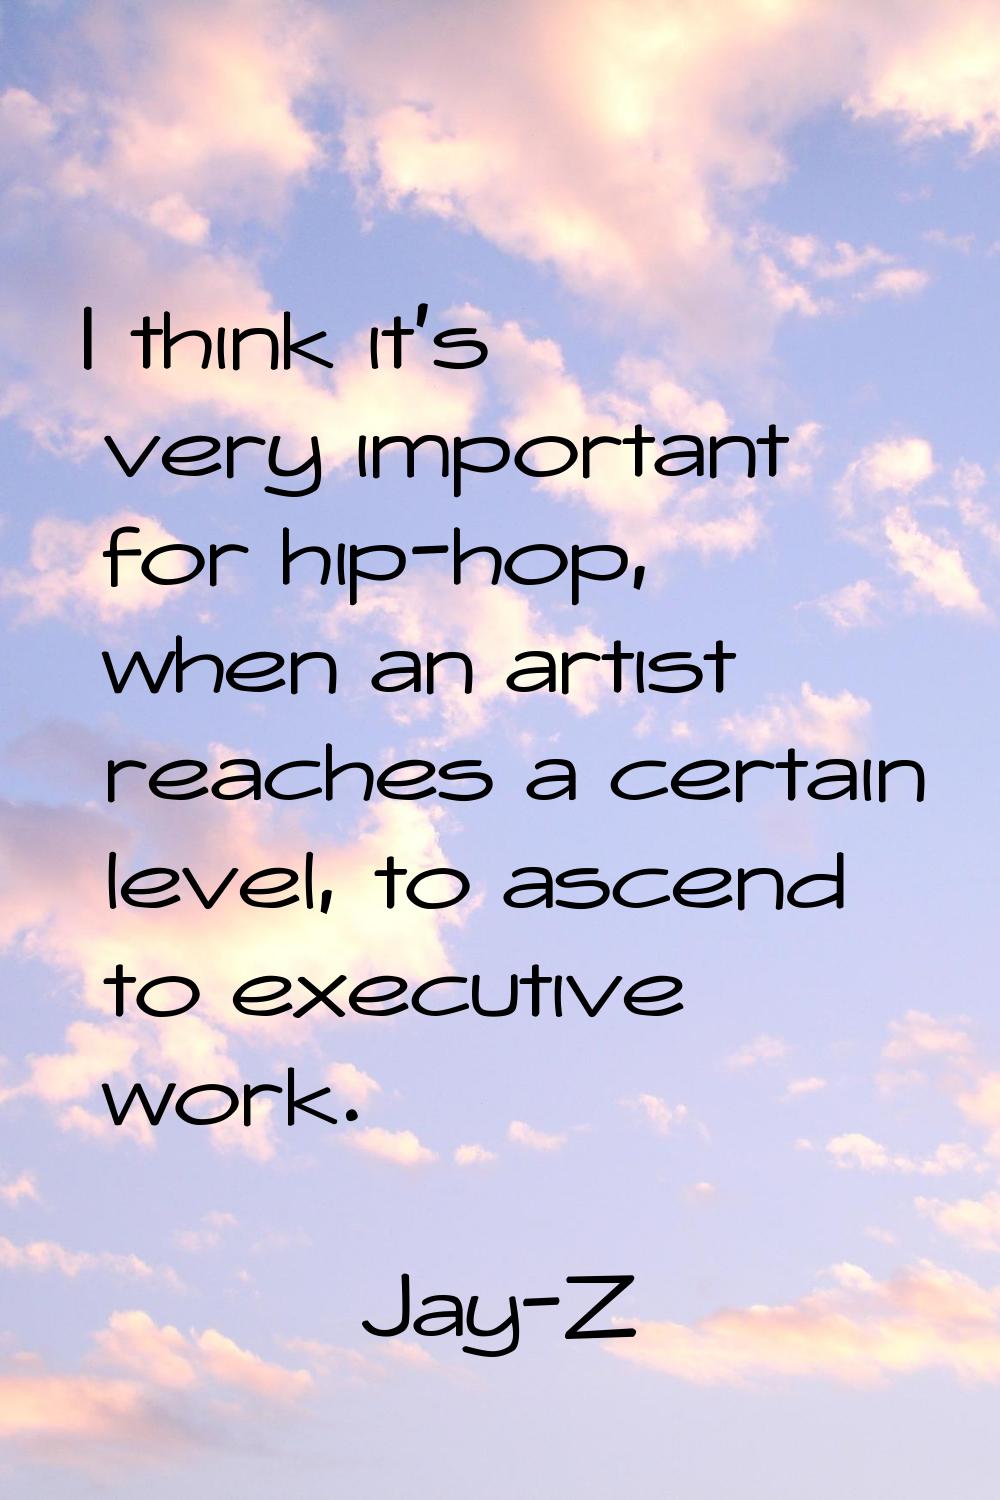 I think it's very important for hip-hop, when an artist reaches a certain level, to ascend to execu